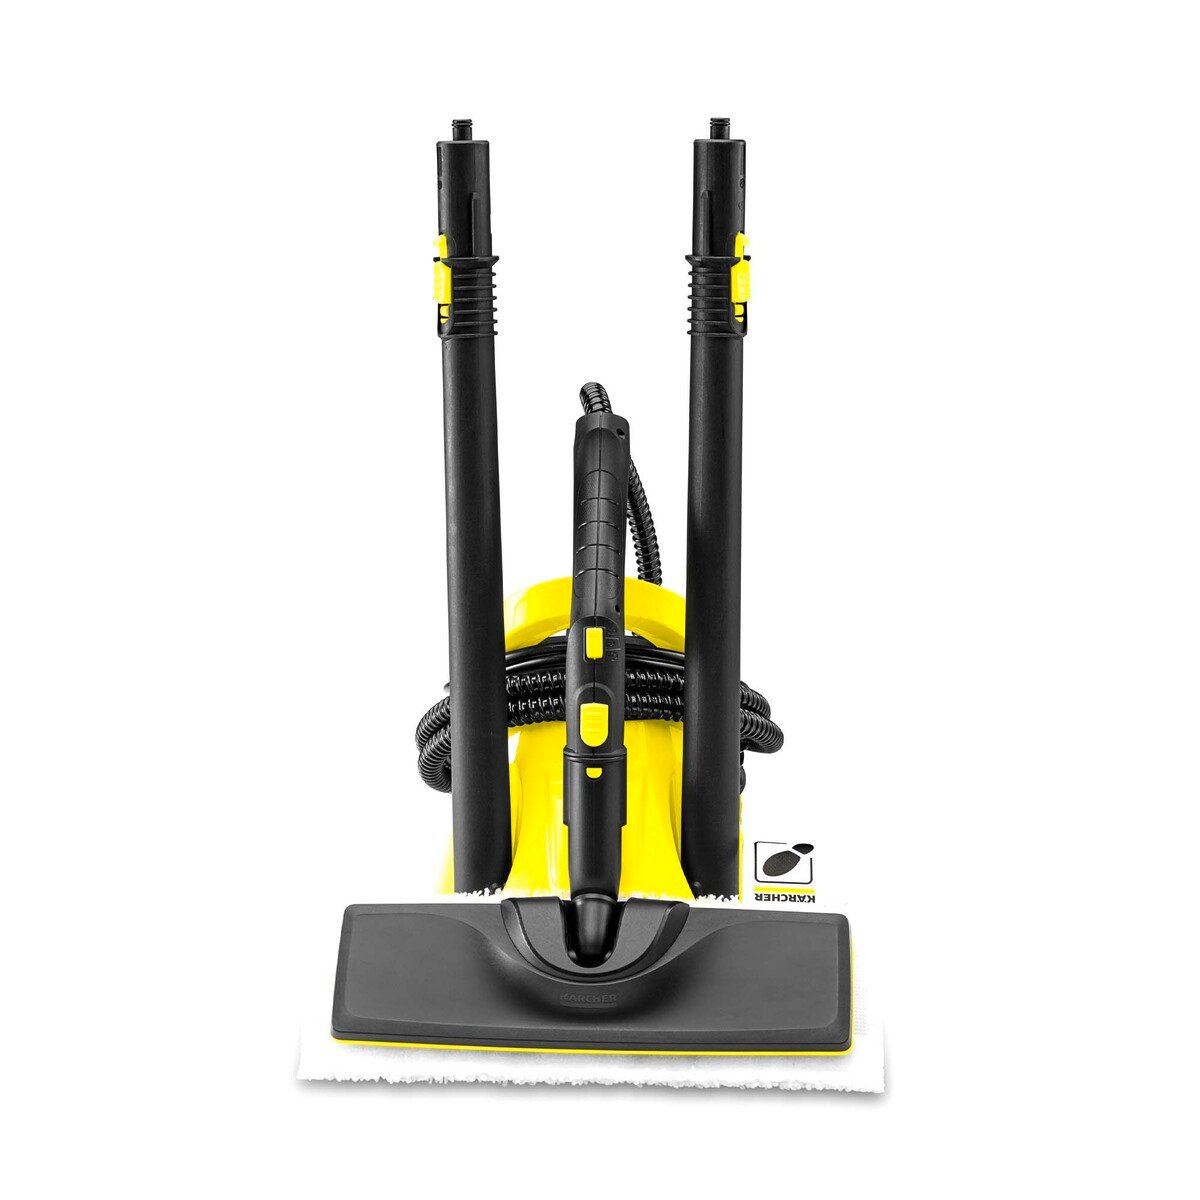 Karcher Steam Cleaner SC 2 Deluxe EasyFix,The entry-level model for steam cleaning without chemicals: The compact SC 2 Deluxe EasyFix with illuminated LED ring for displaying the operating mode. Ideal for all hard surfaces throughout the home.